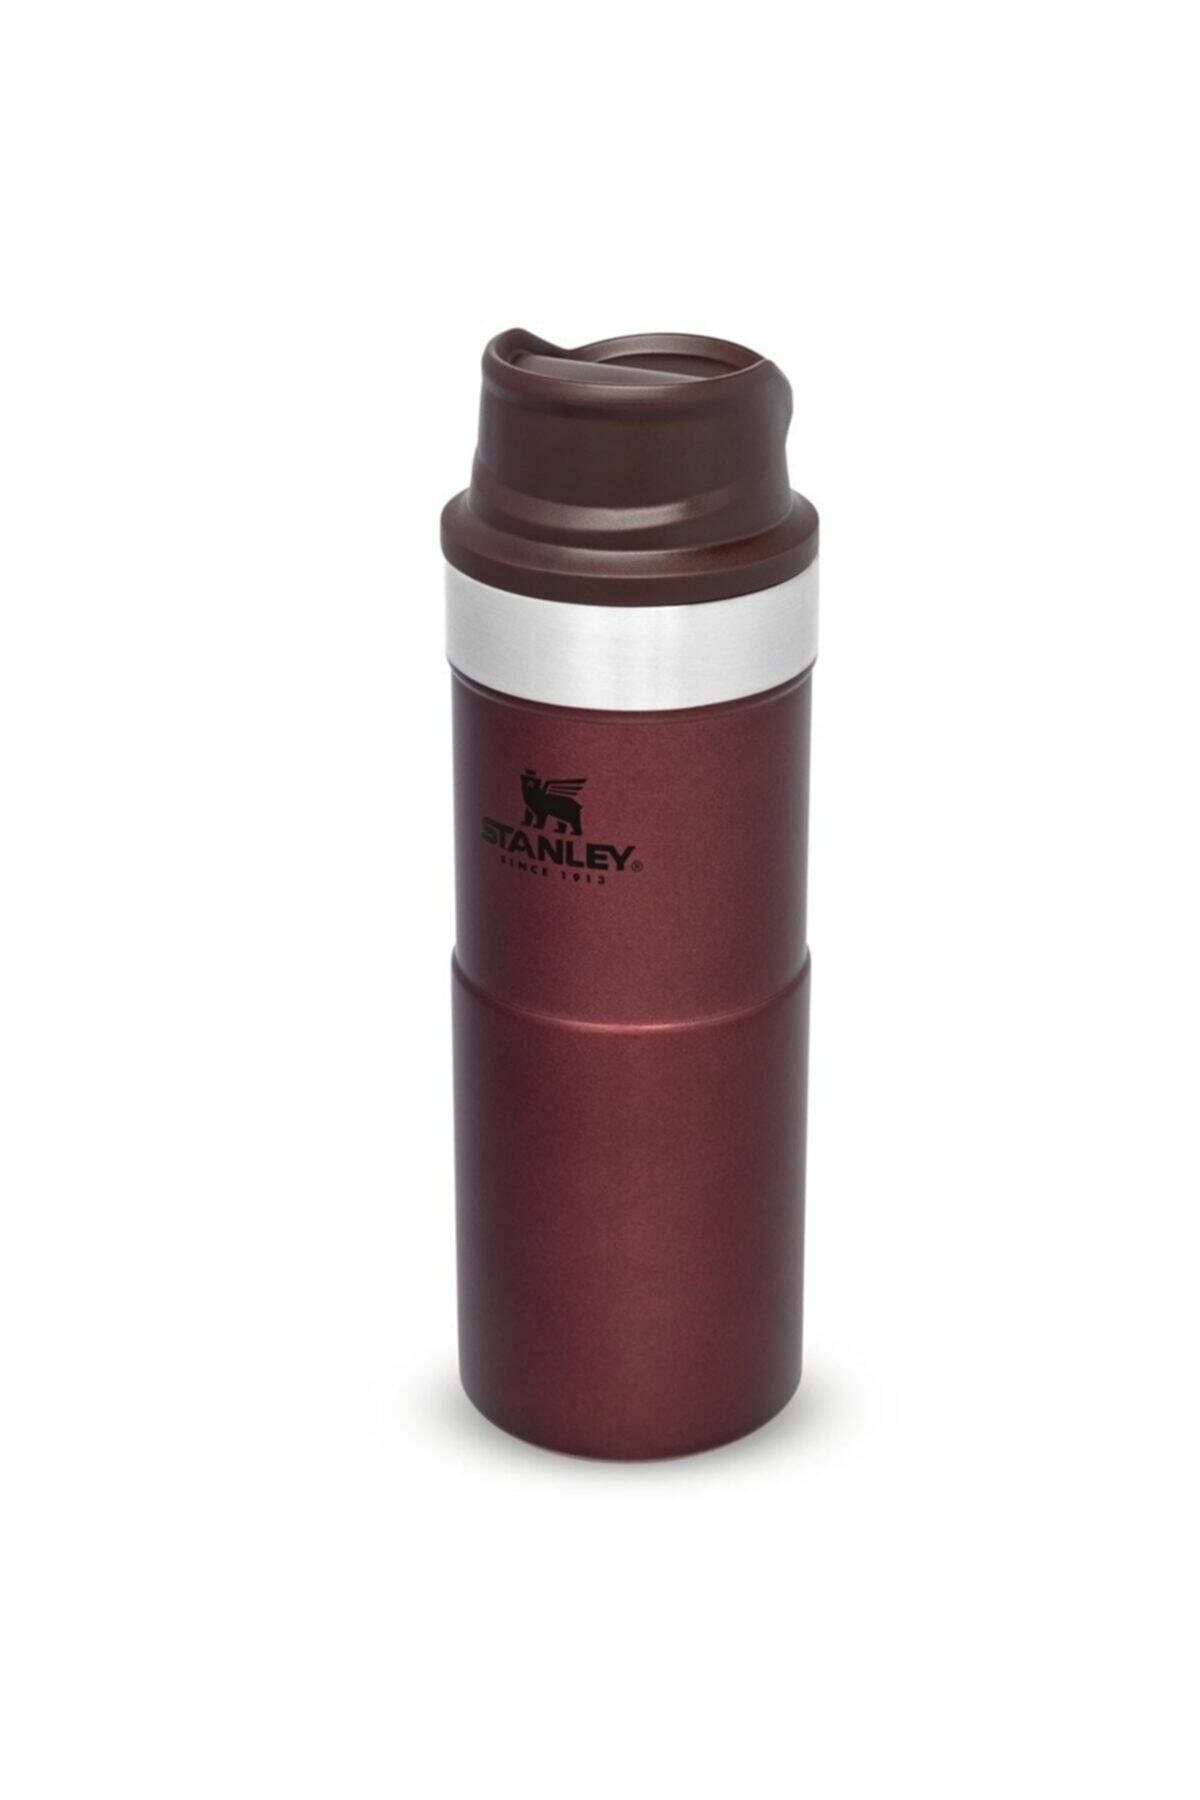 Stanley Classic Trigger-Action Claret Red Thermos Cup 0.35 LT - Trendyol